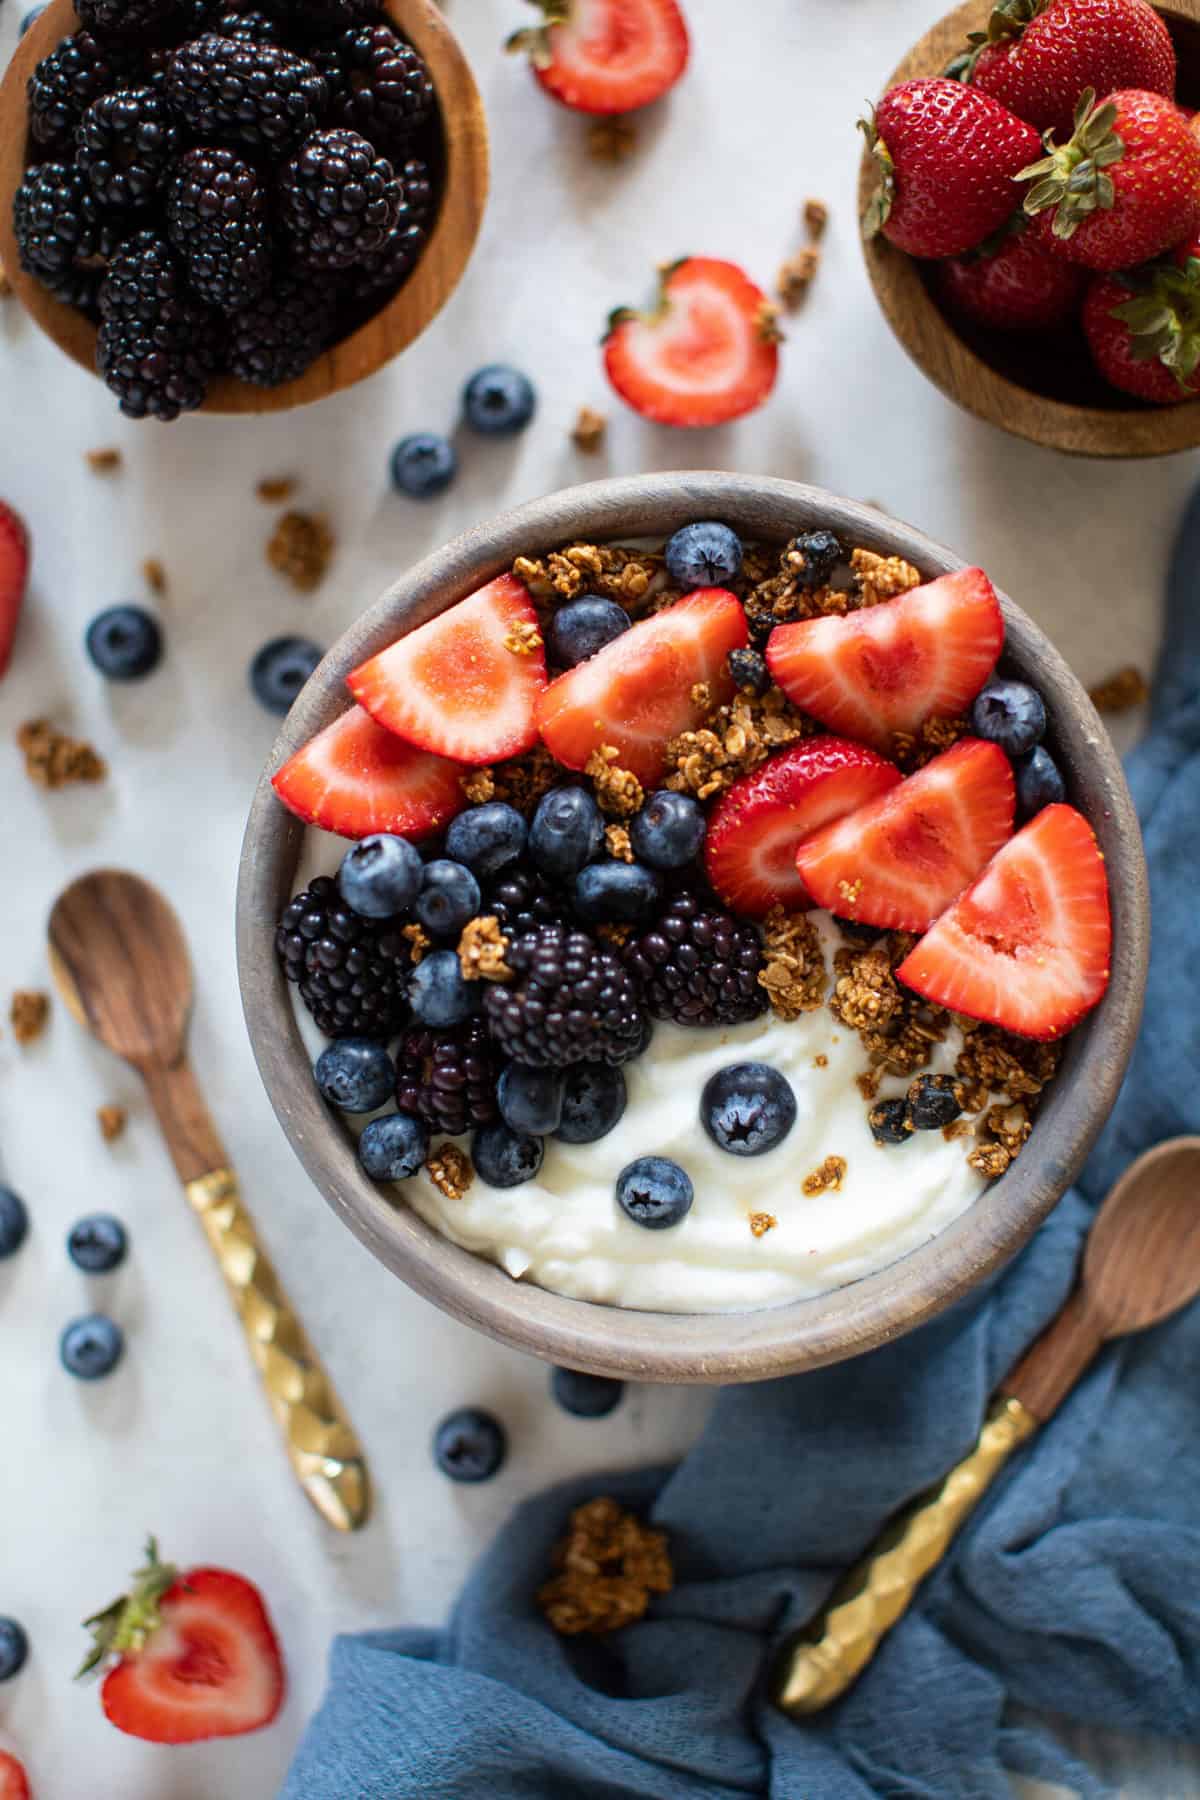 Easy Yogurt Bowls - 8 different ideas to make your breakfast awesome!